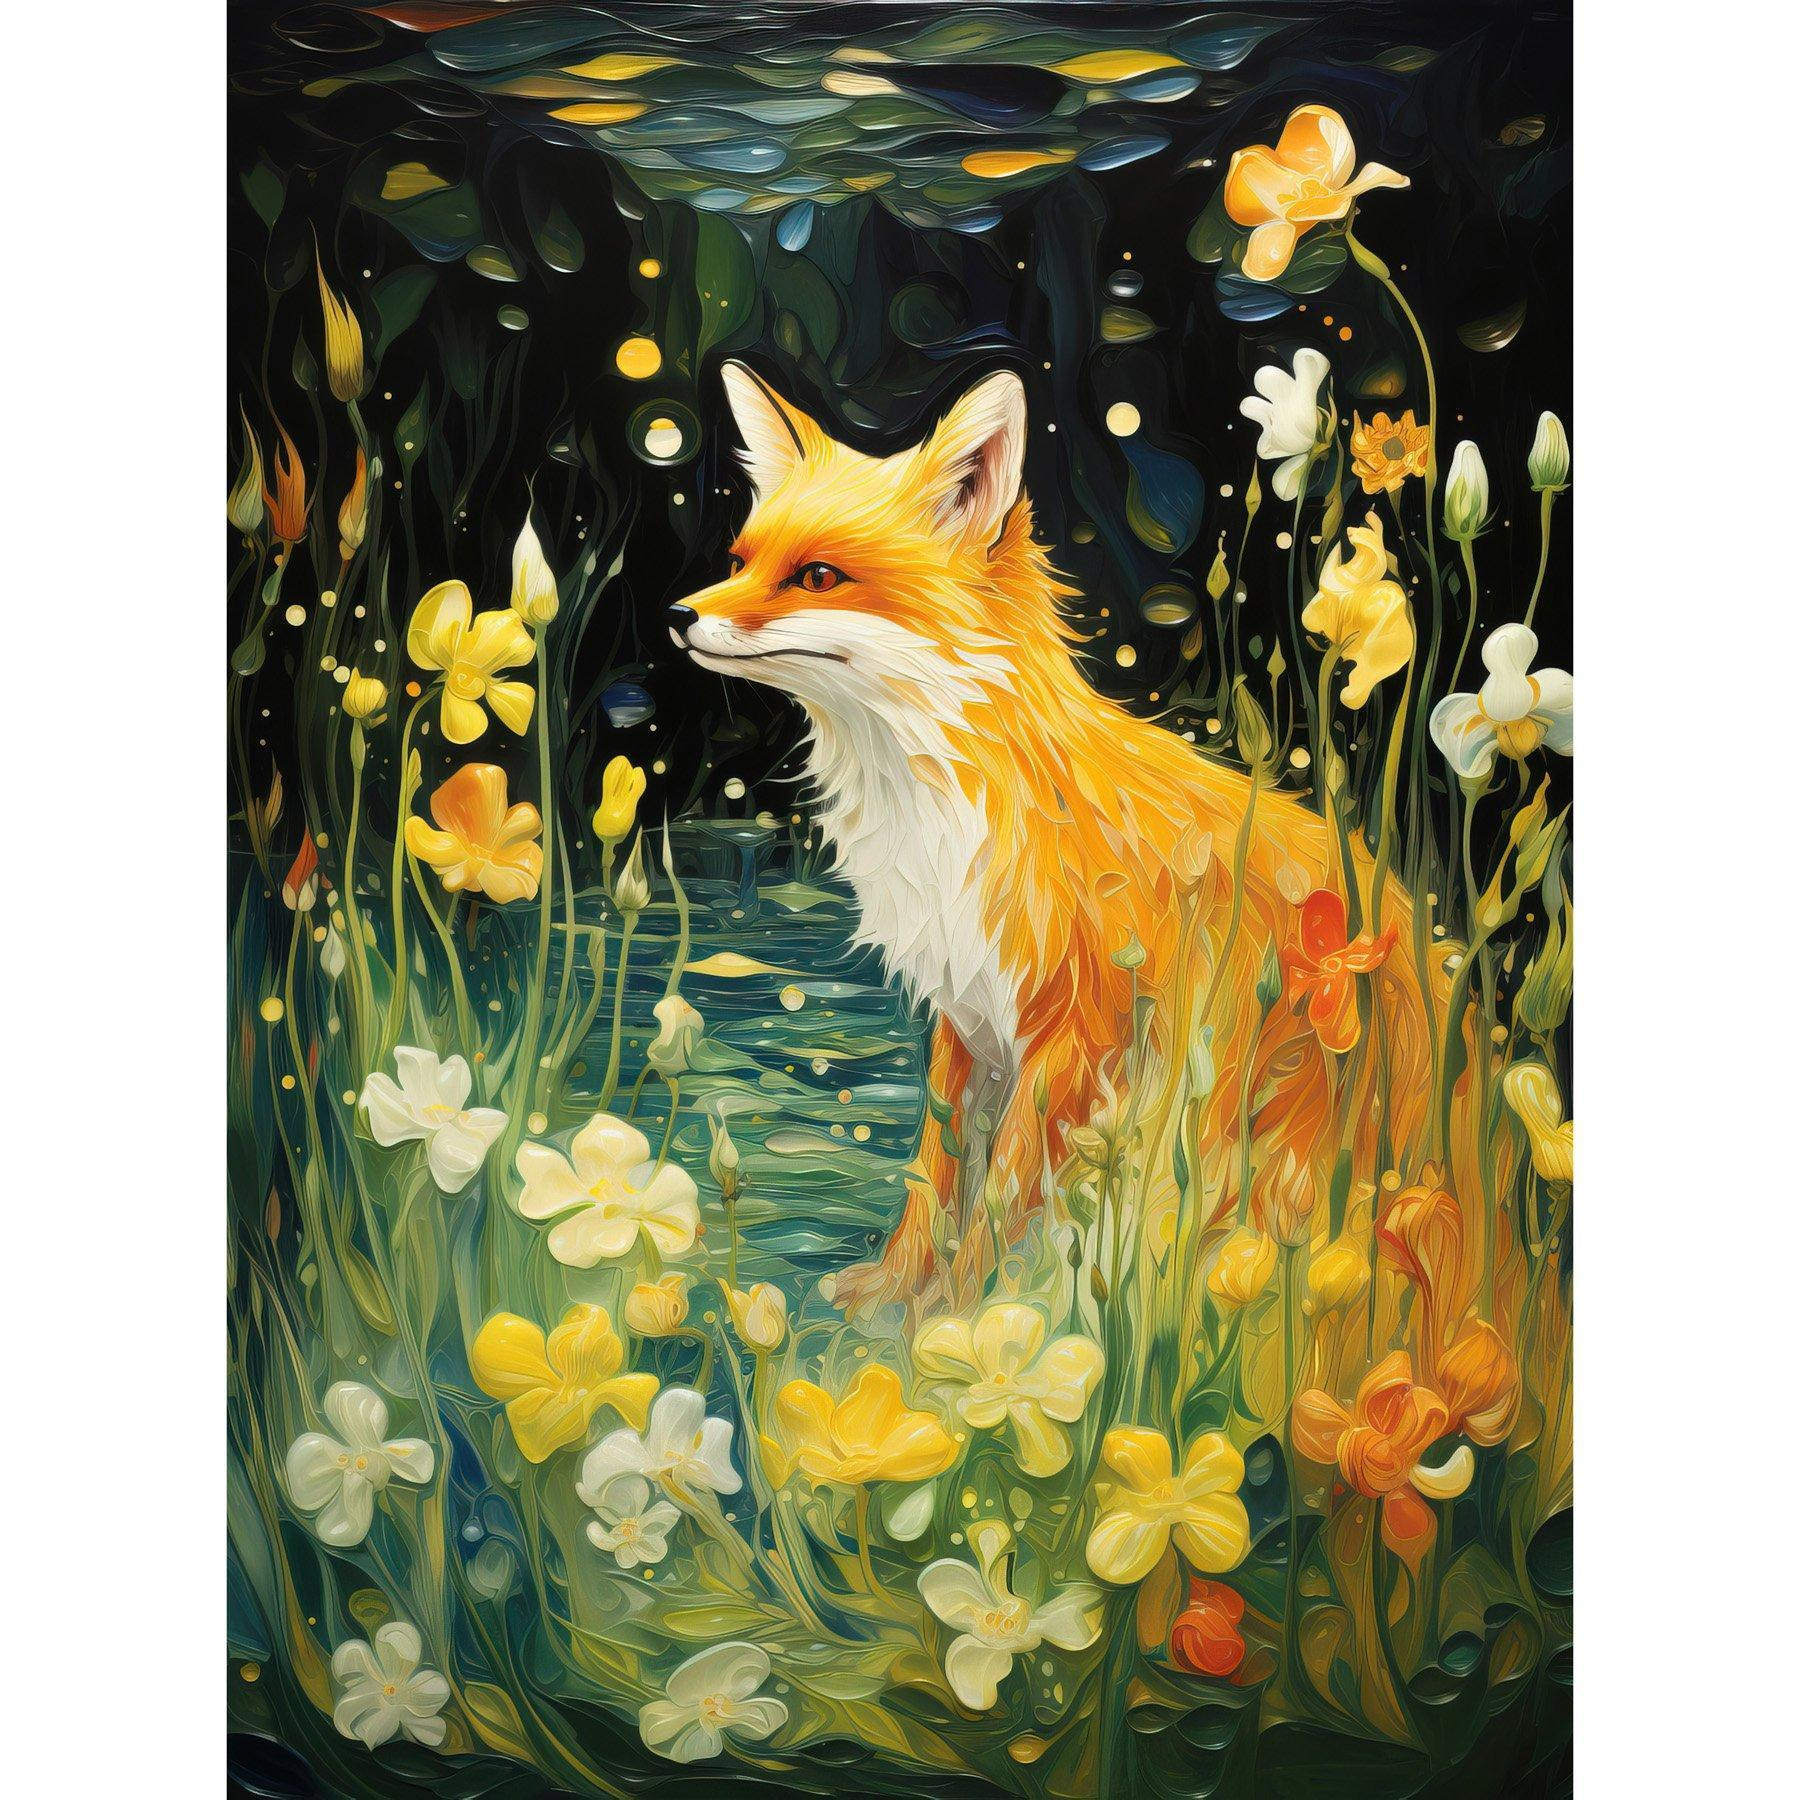 Fox Dream Floral Yellow Oil Painting Orange White Dreamscape of Lily Flowers in Spring Unframed Wall Art Print Poster Home Decor Premium - image 1